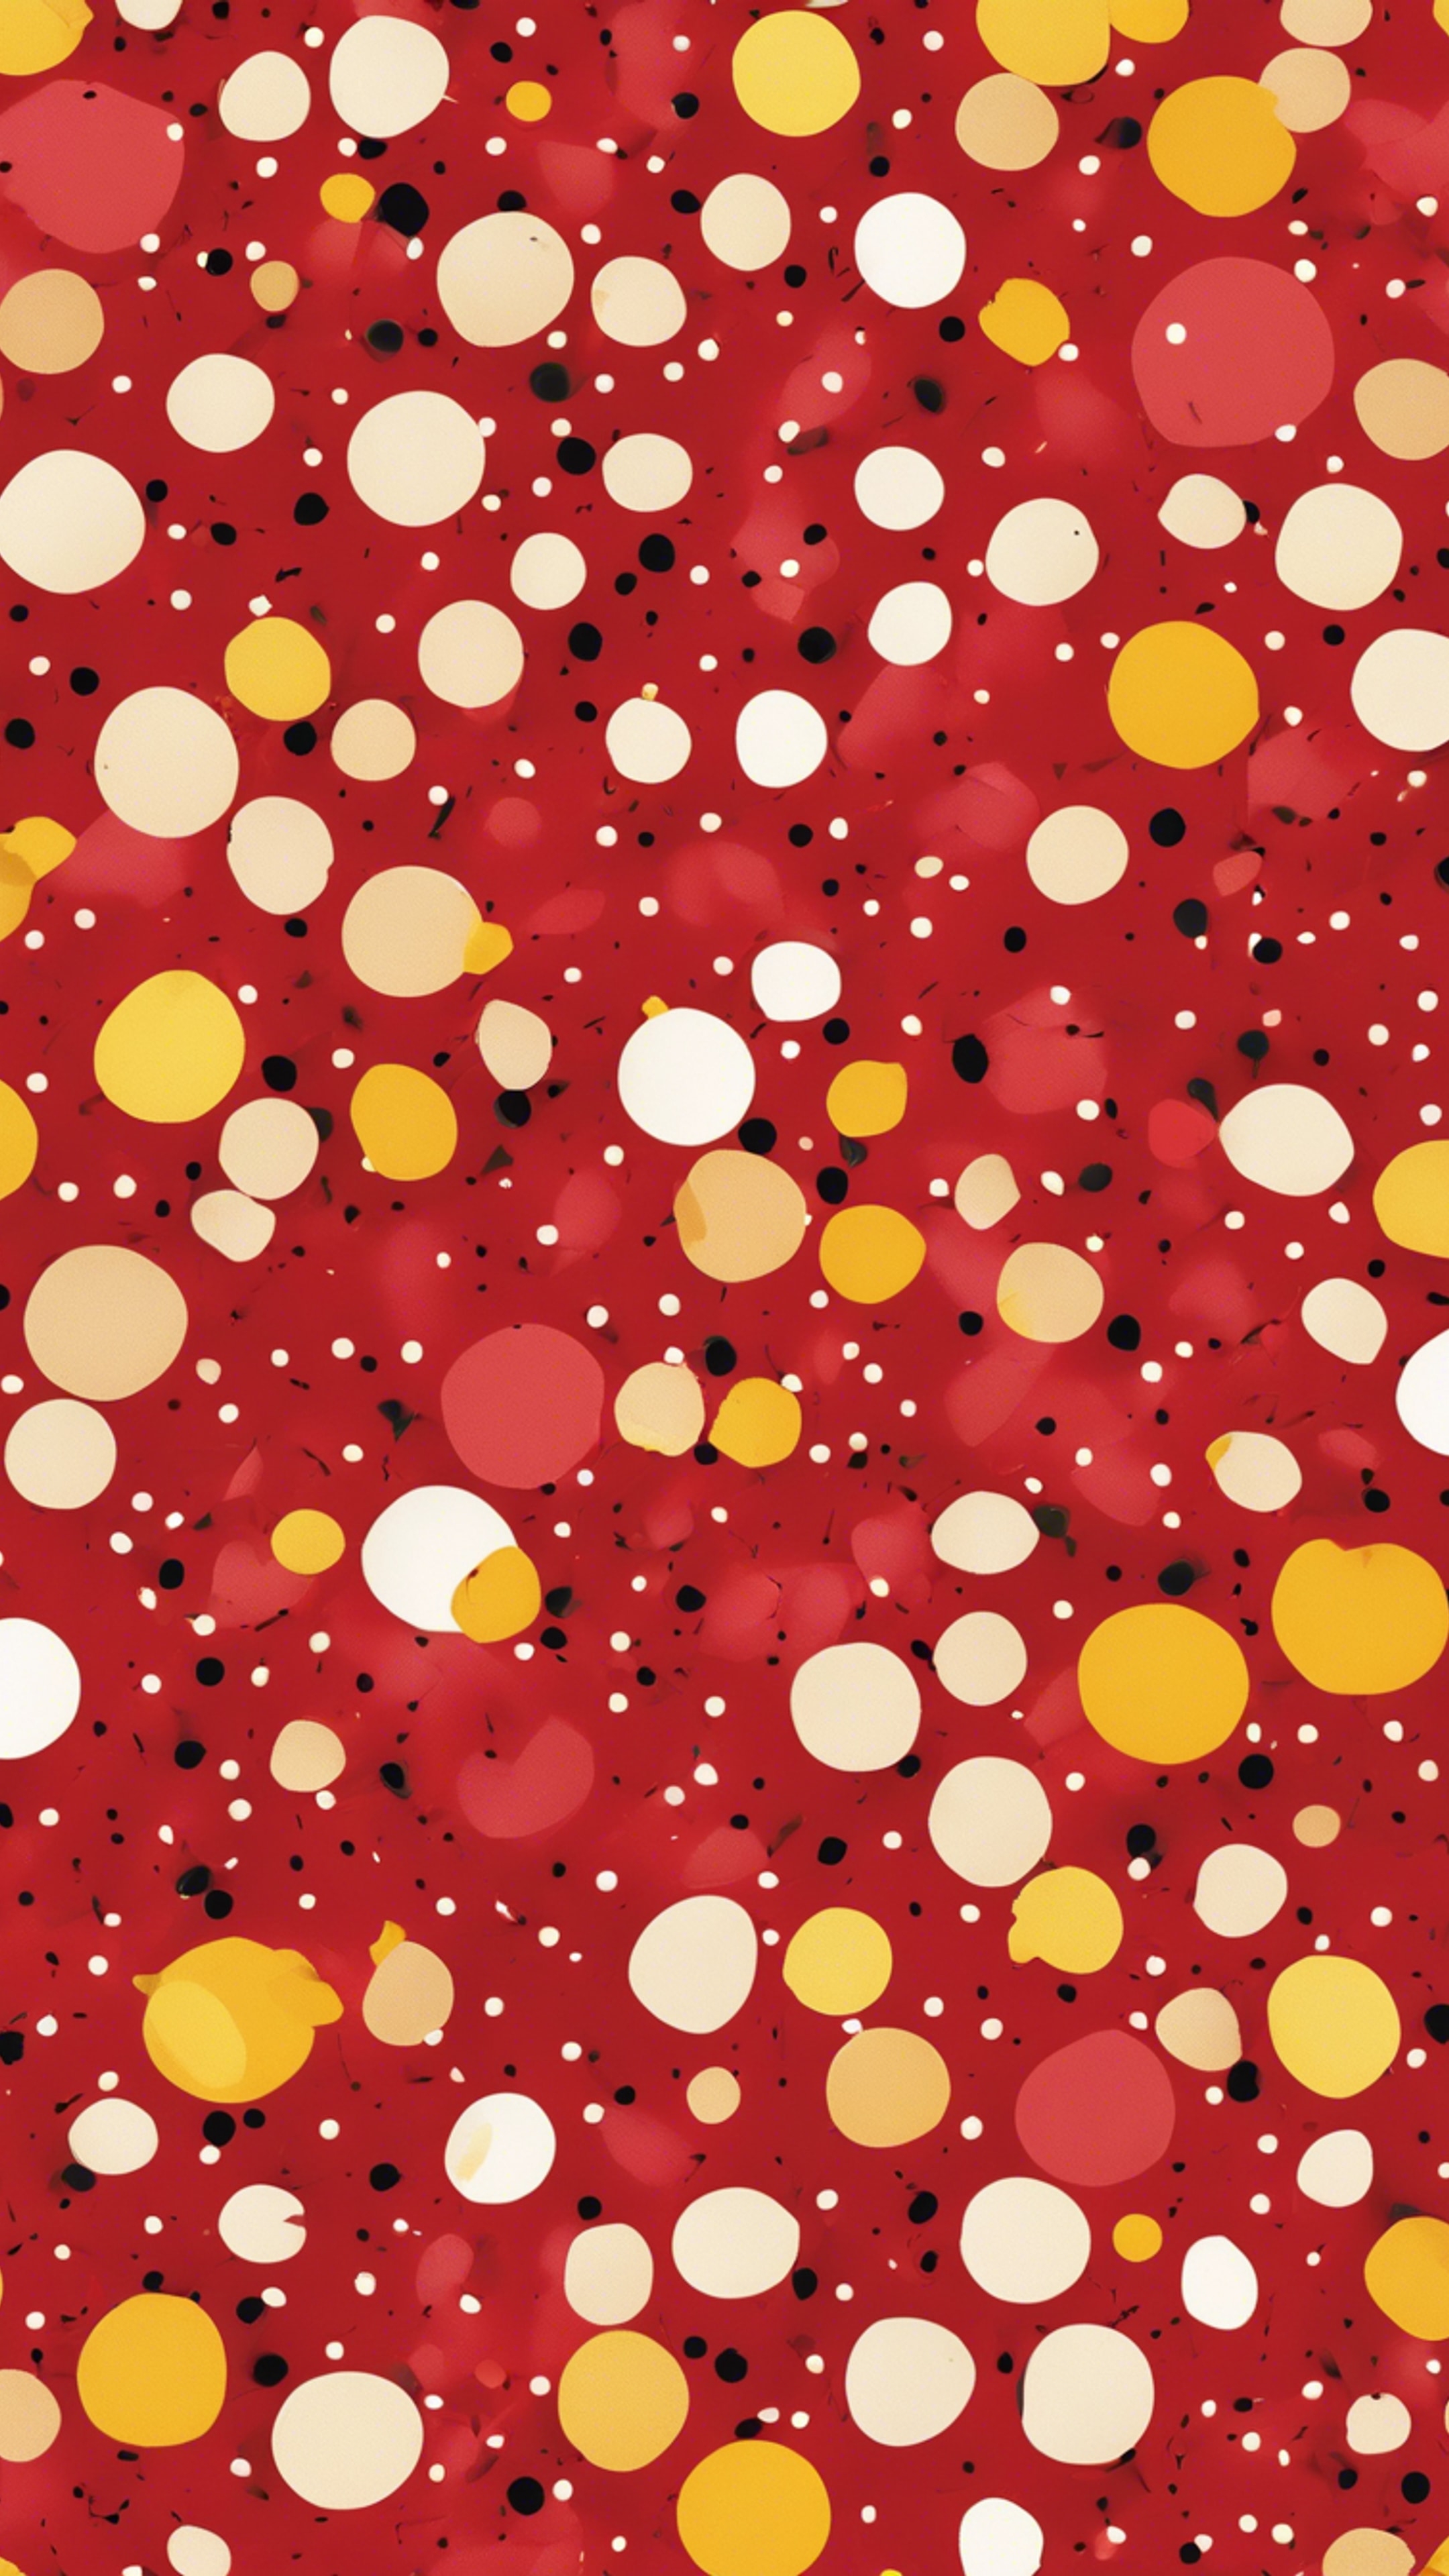 A seamless pattern of vibrant red and vivid yellow, polka dots scattered randomly. 벽지[206bafc01adc43569588]